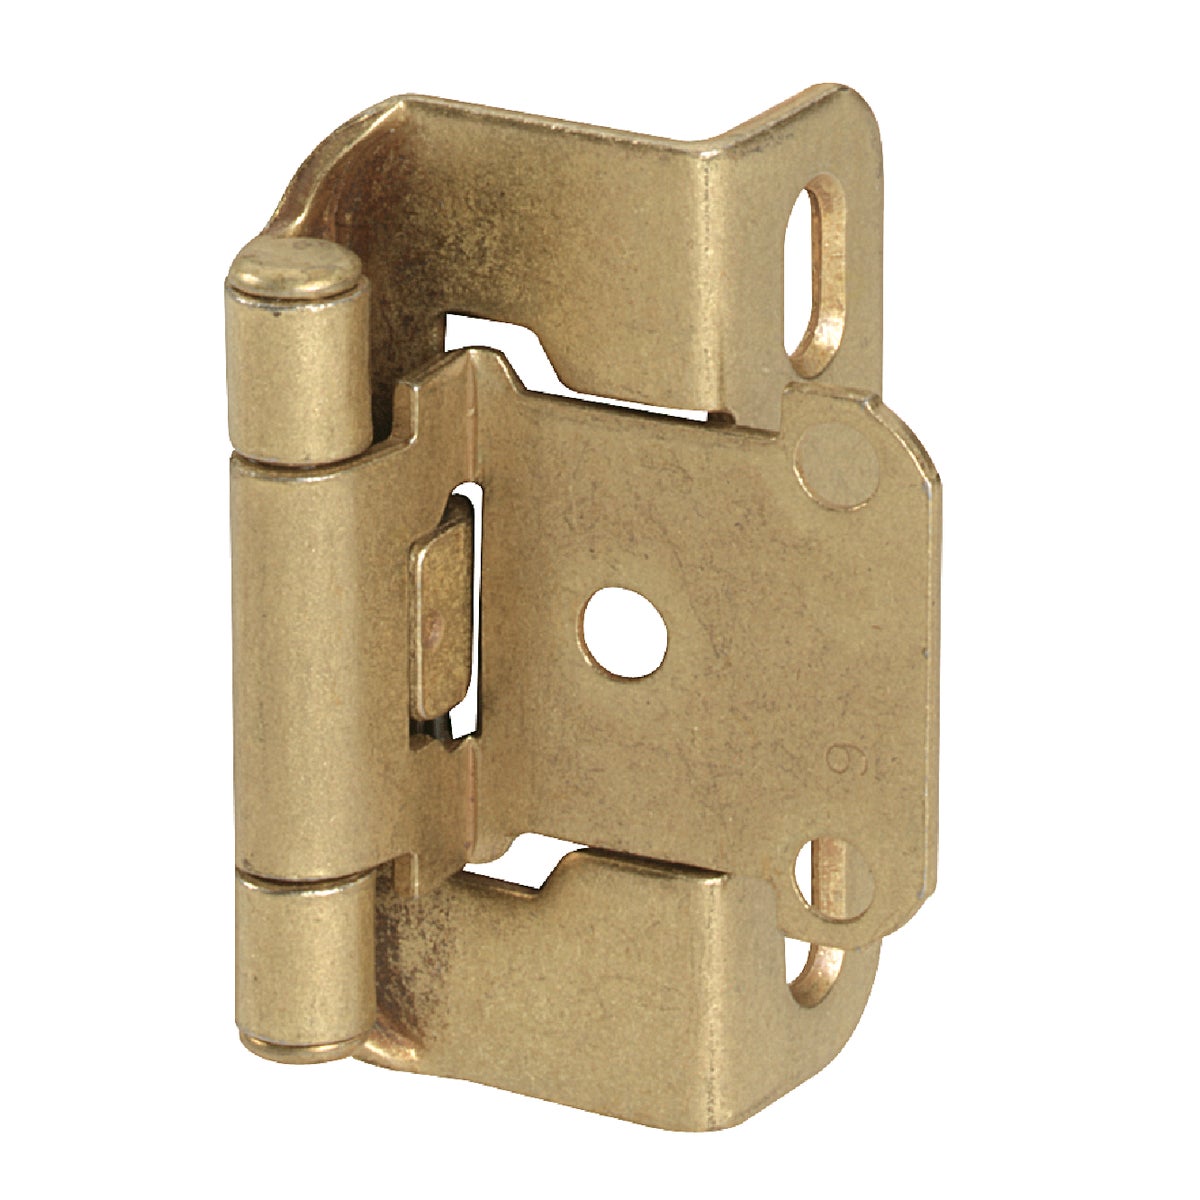 Item 202738, Overlay wrap cabinet door hinge with 105 degree opening angle and self 